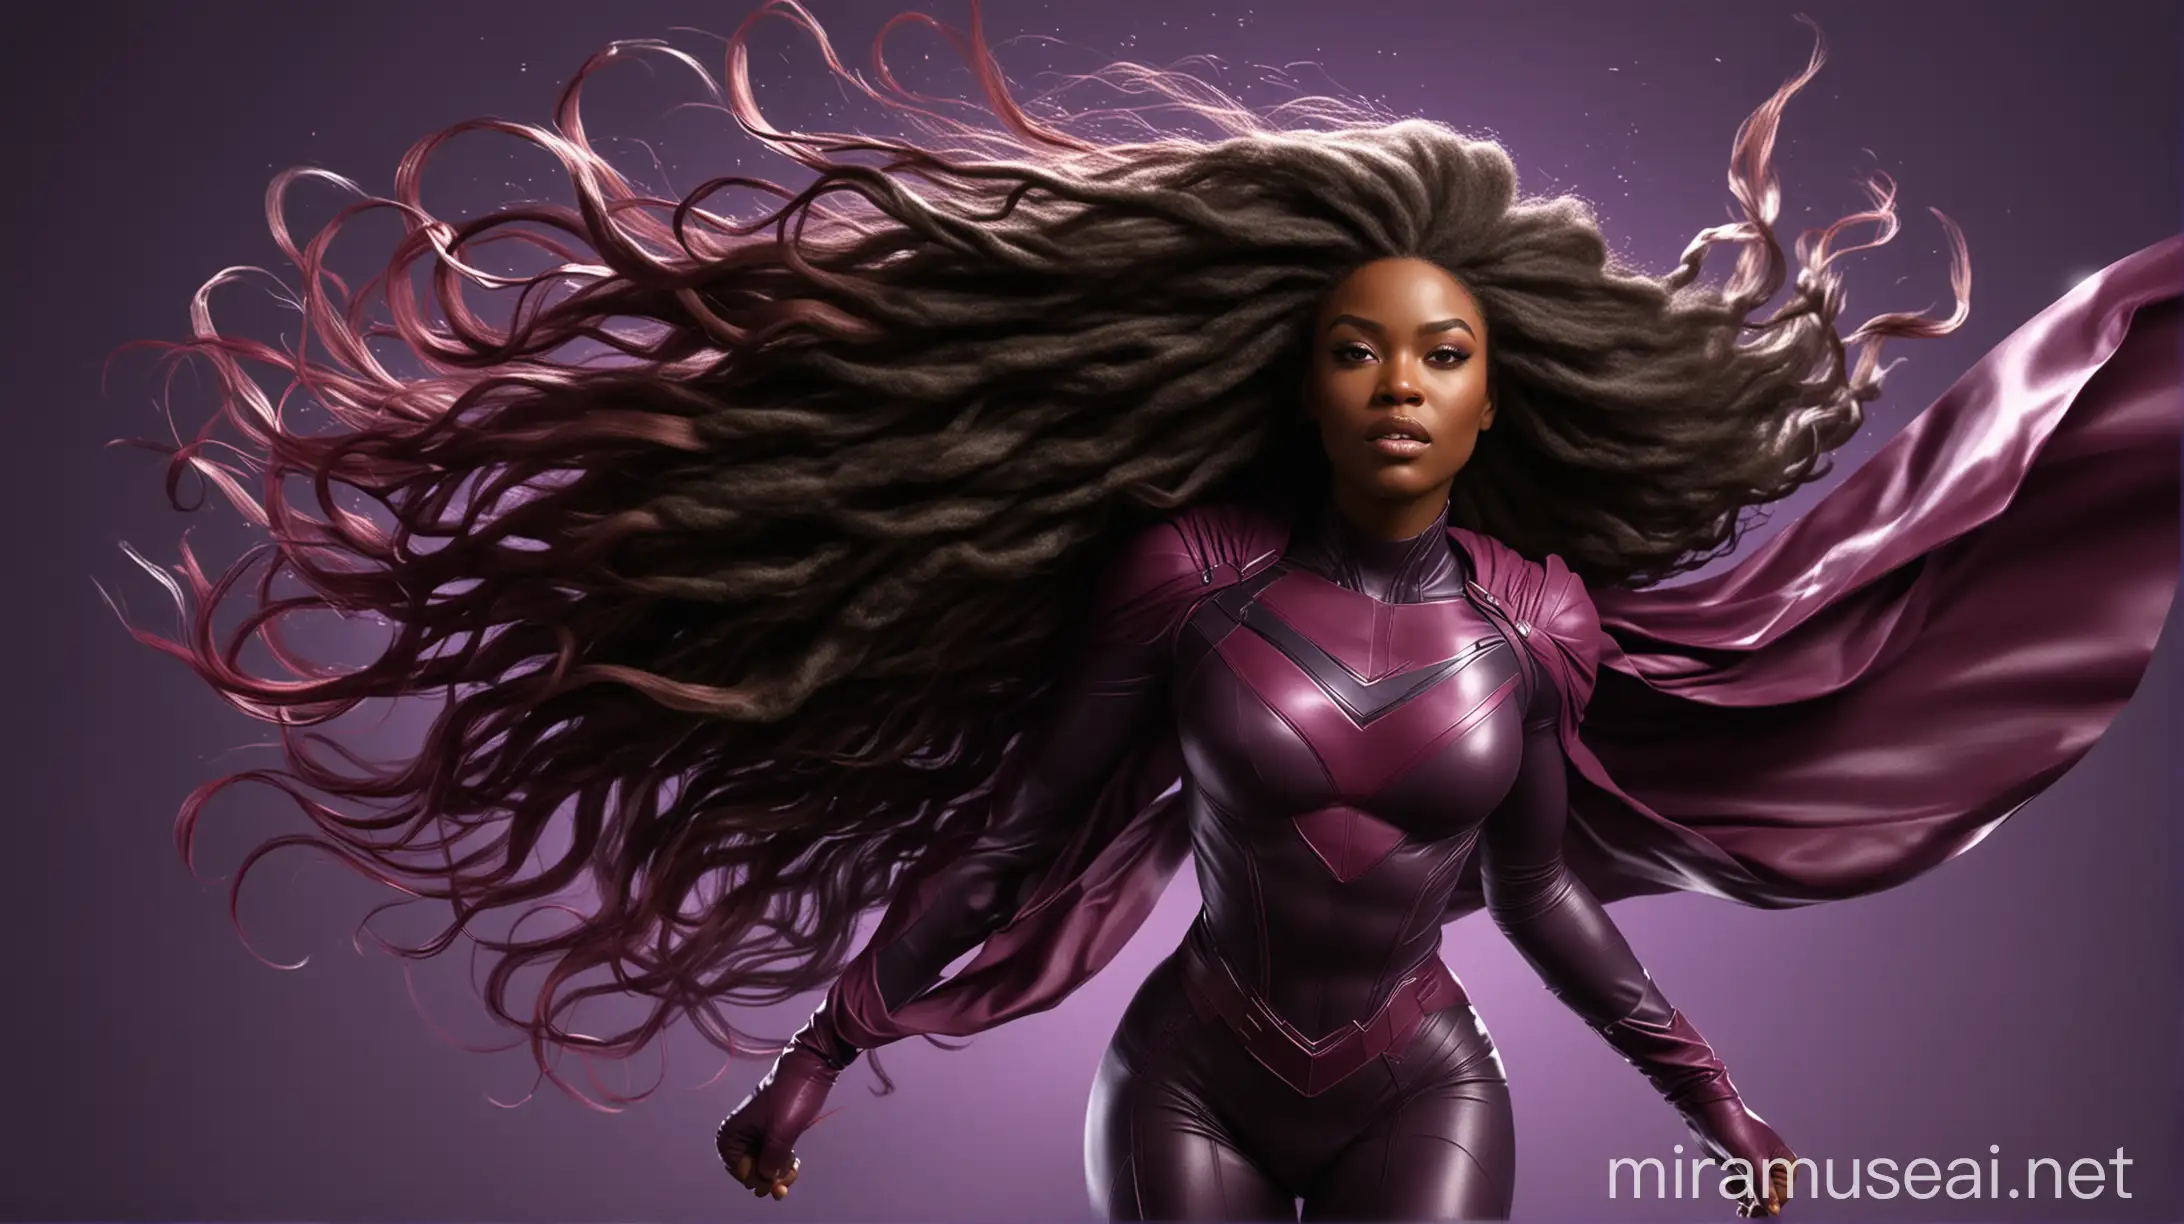 3D image of Black woman superhero on black, burgundy, purple outfit with wind blowing behind her with natural long hair